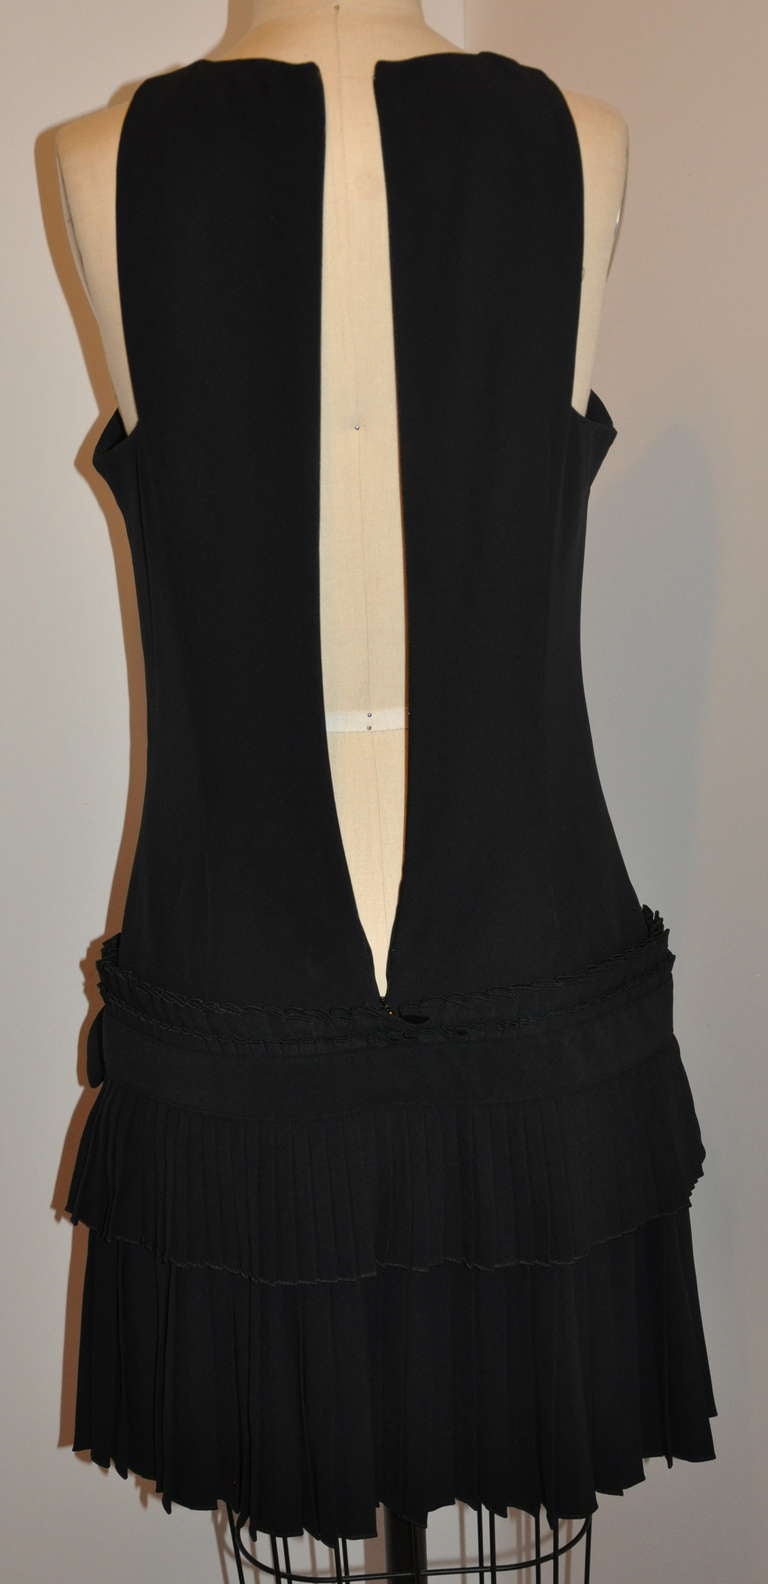 Women's Alexander McQueen Fully Lined Black Two-Tiered Cut-Out Dress For Sale